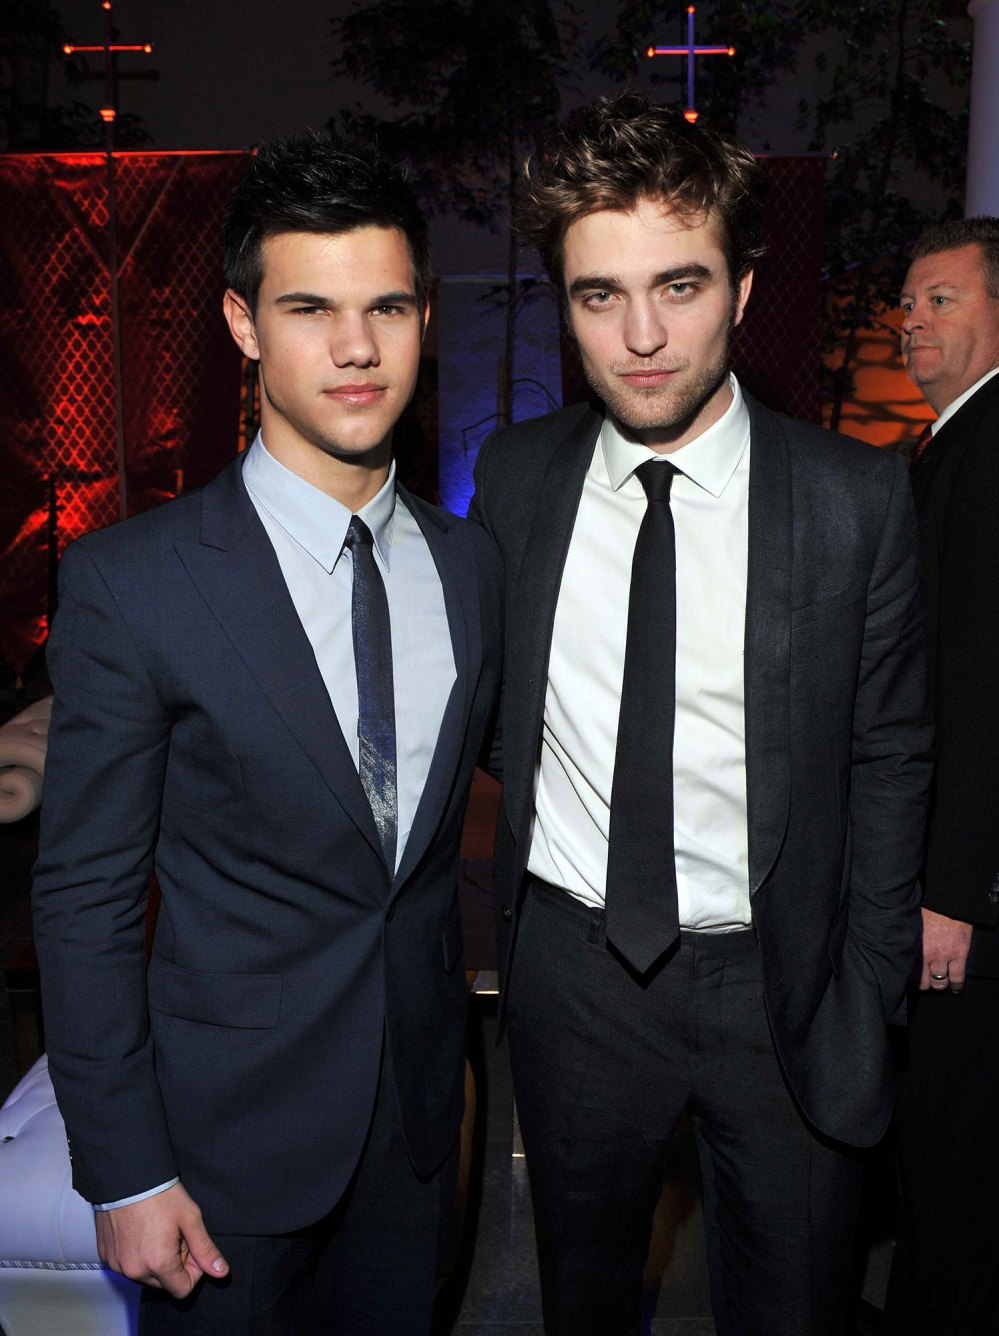 Taylor Lautner Recalls Difficult Fan Rivalry With Robert Pattinson During Twilight Days